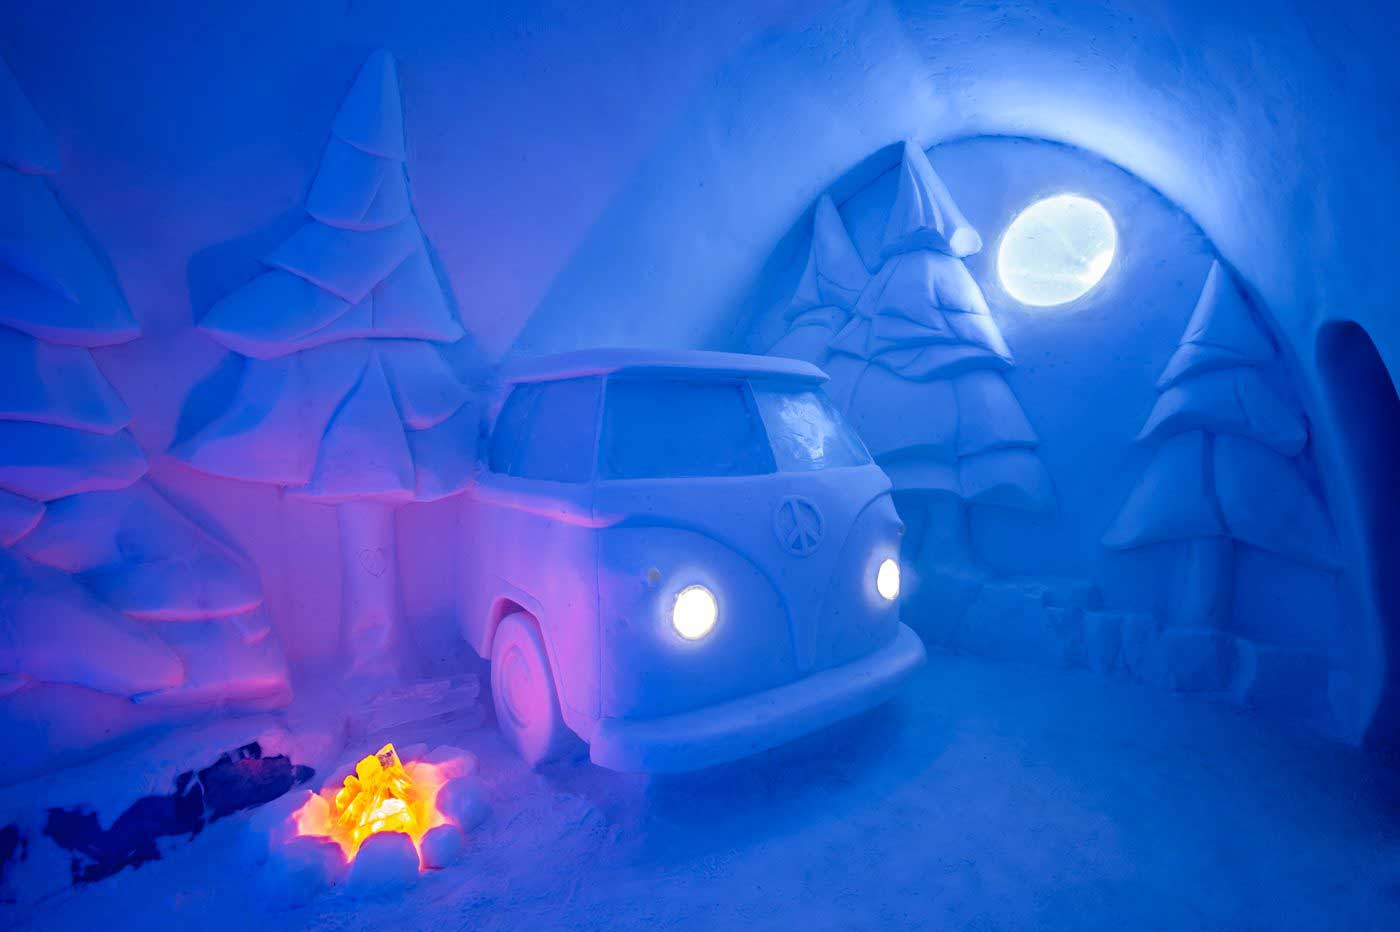 This year’s Icehotel has forest, ocean, and sweet shop-themed rooms